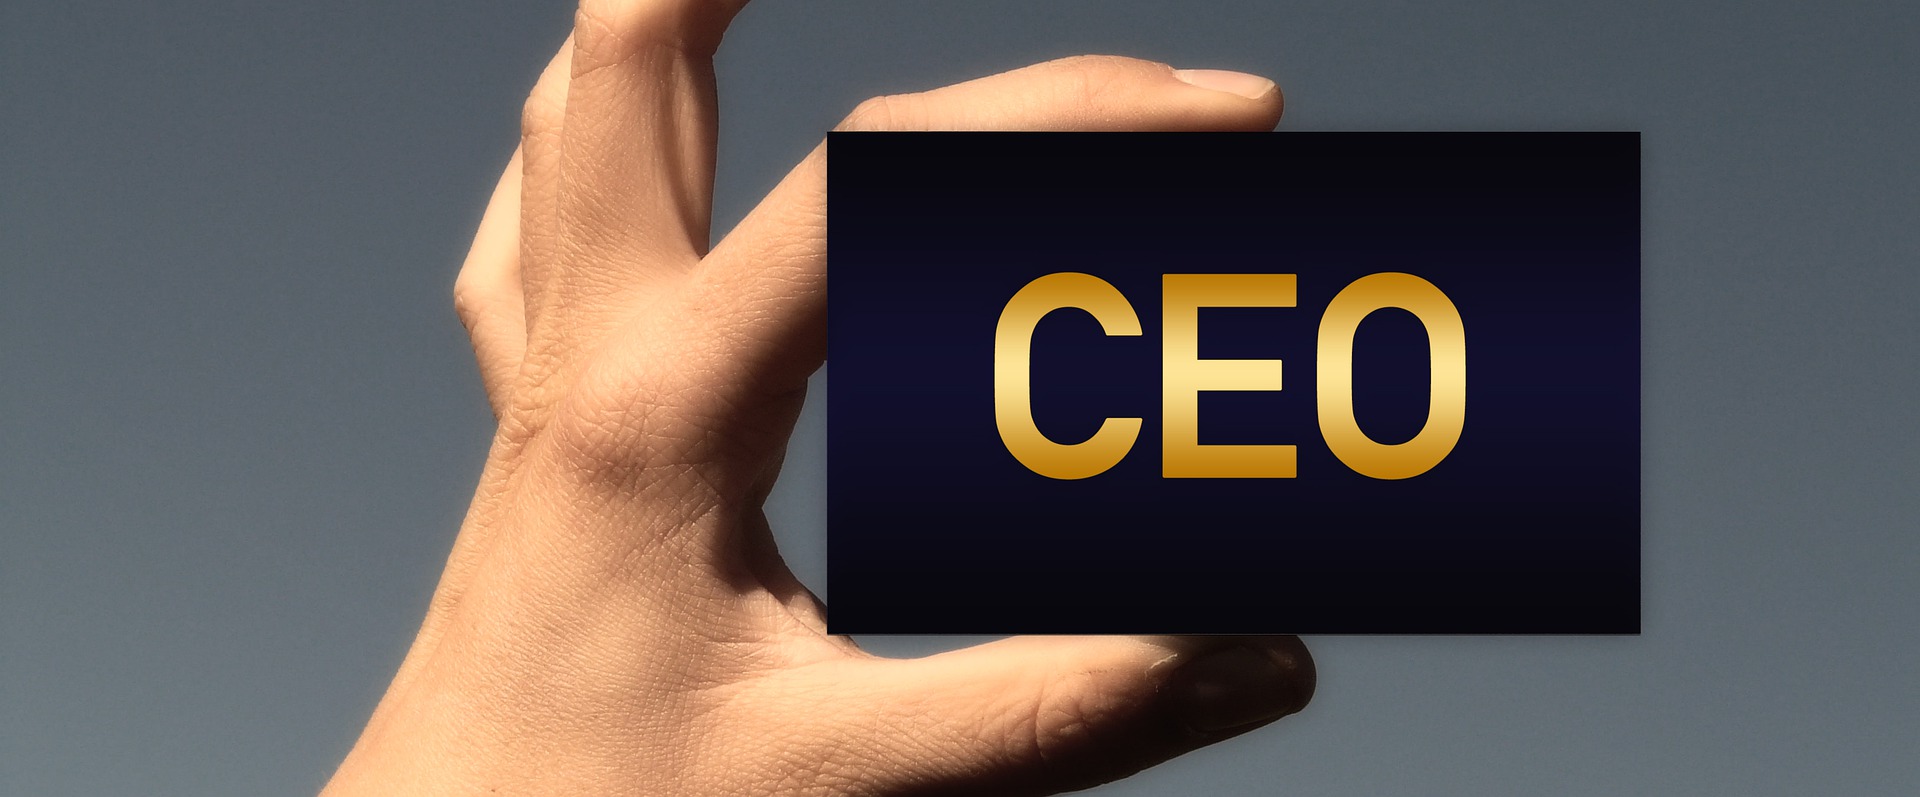 4 ways CEO leadership is changing